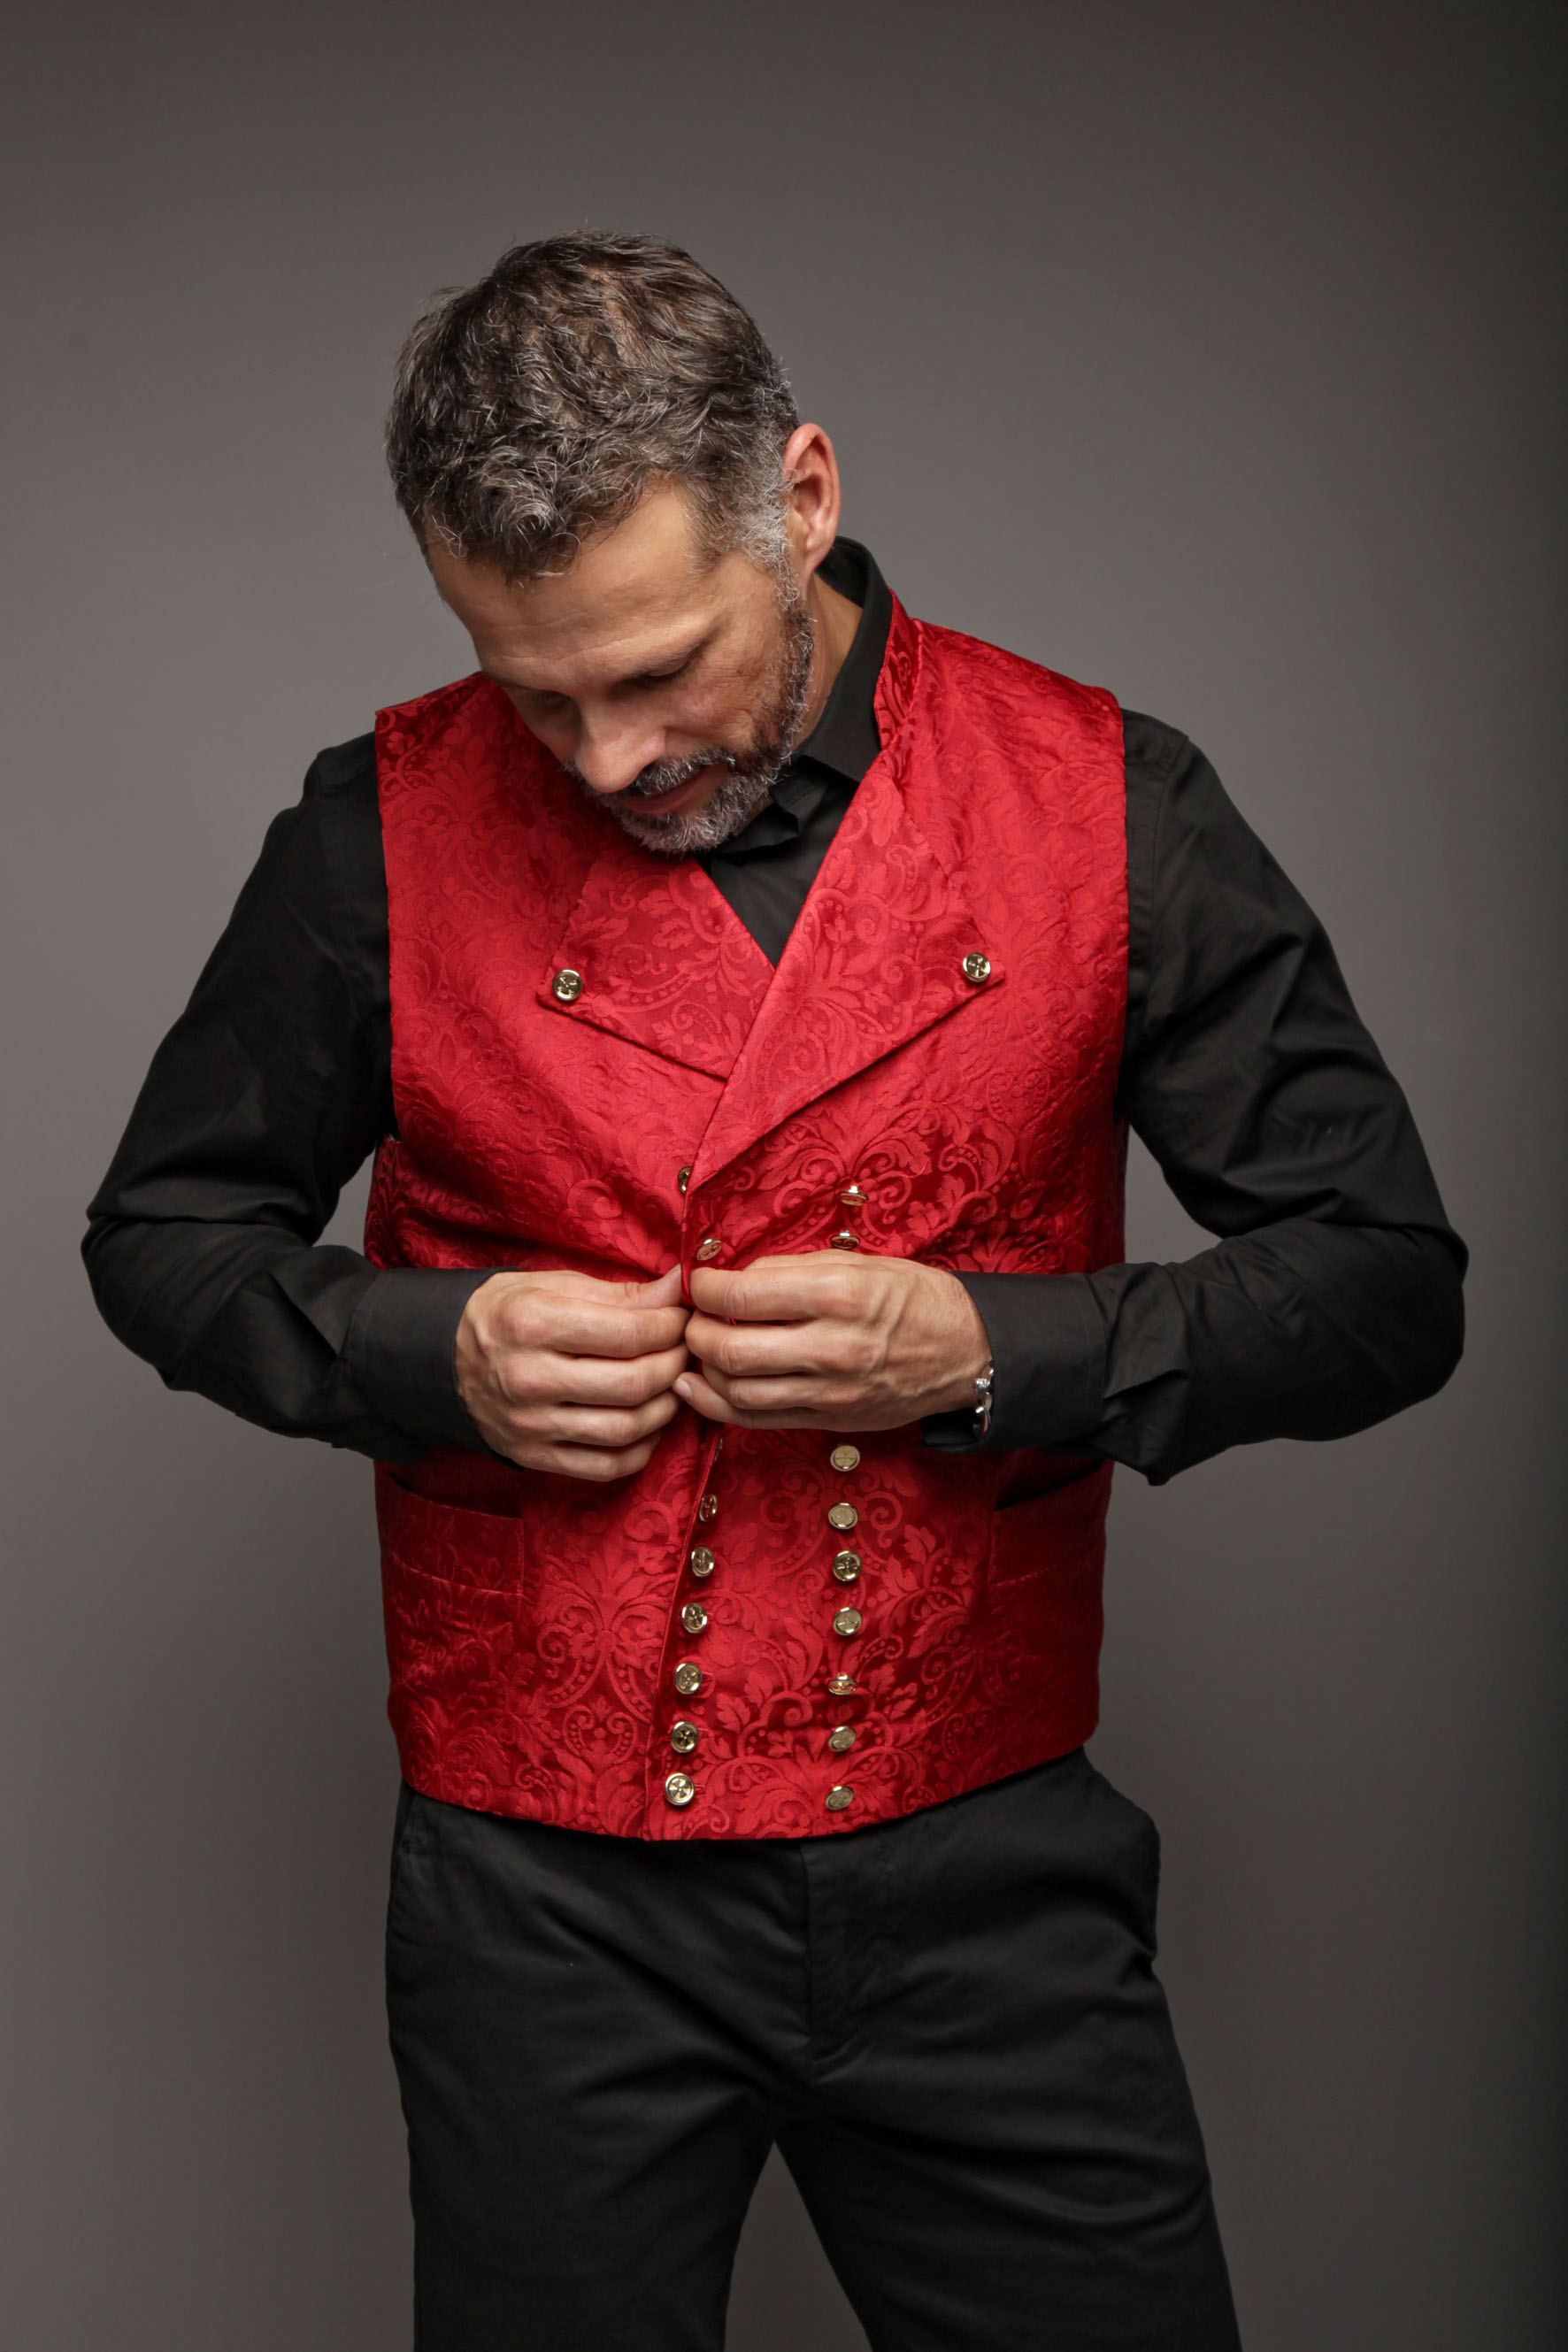 gilet costume rouge homme